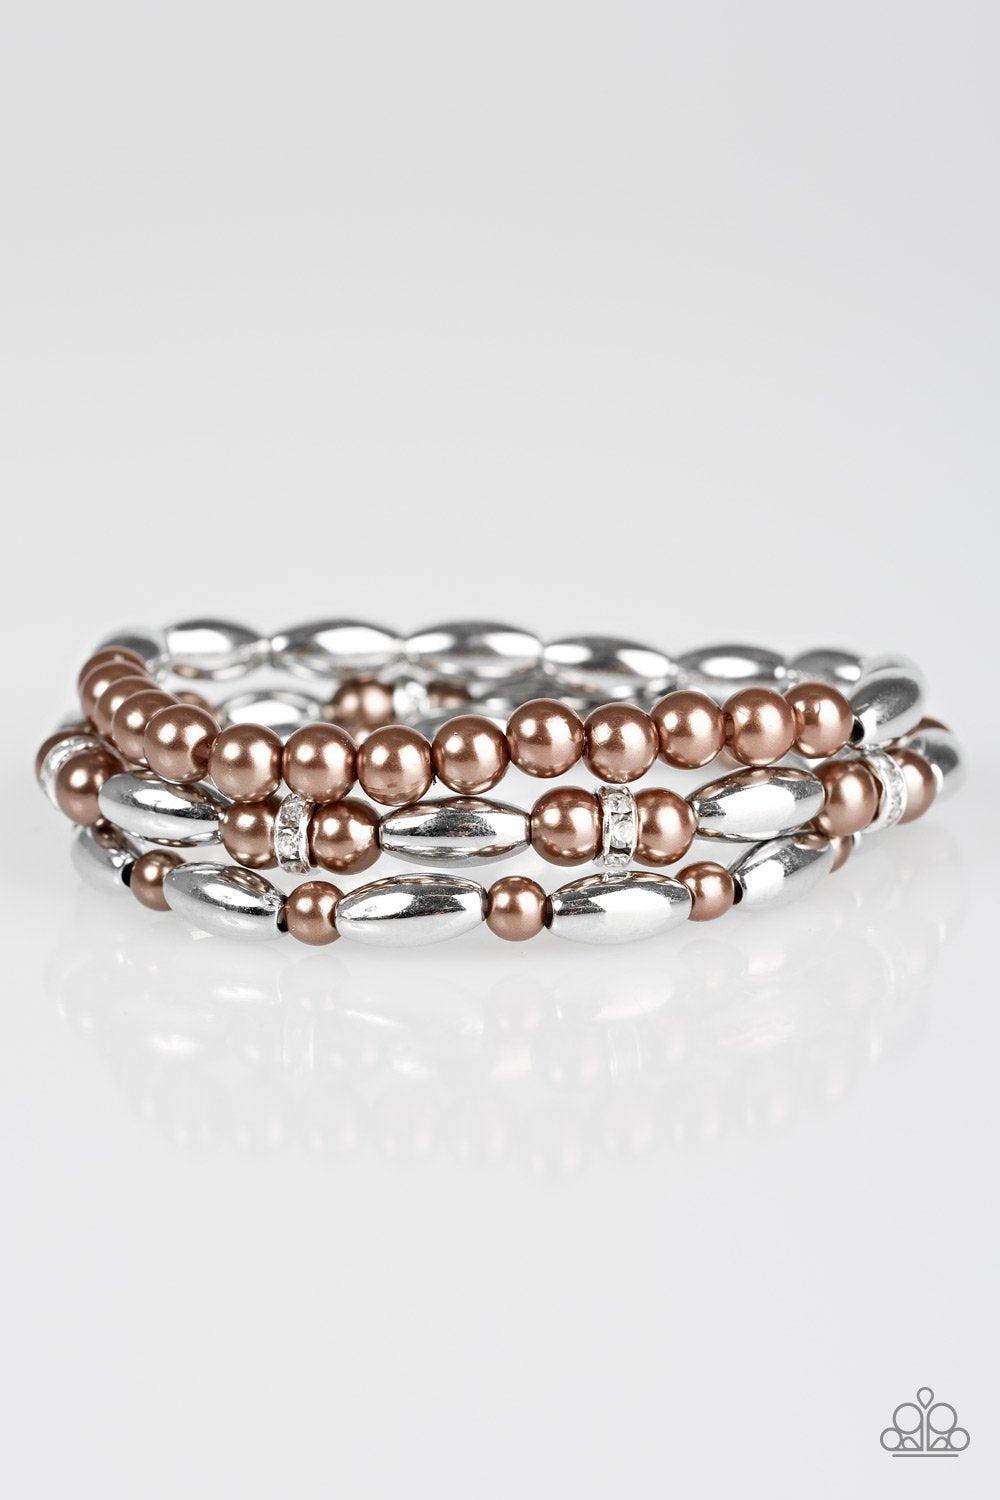 Chic Contender Silver and Brown Stretch Bracelet Set - Paparazzi Accessories-CarasShop.com - $5 Jewelry by Cara Jewels